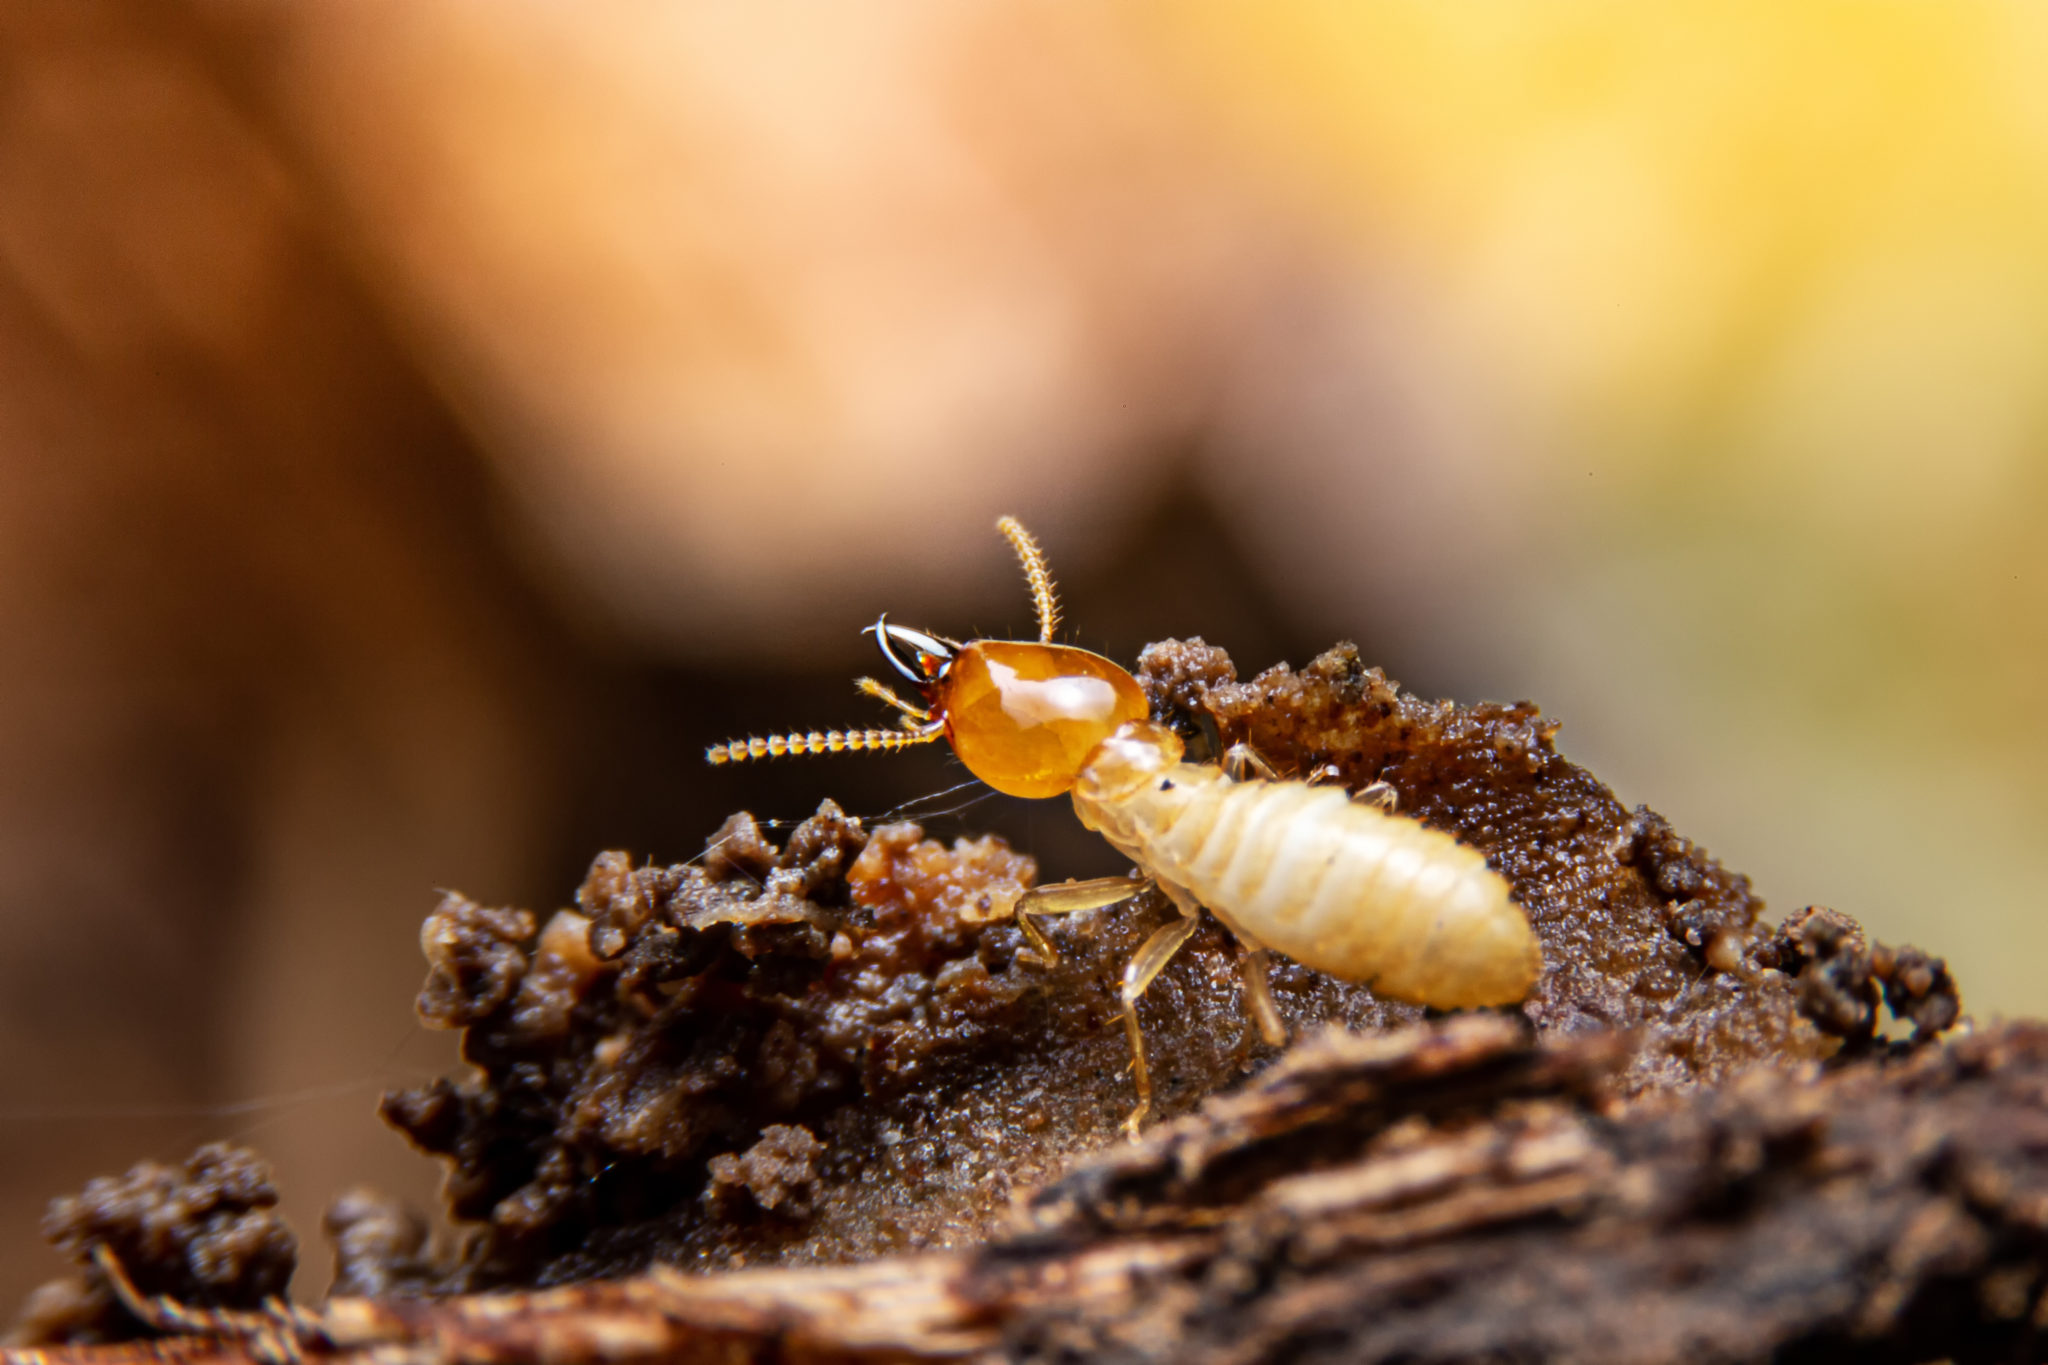 Local Termite Control Experts Around Cairns